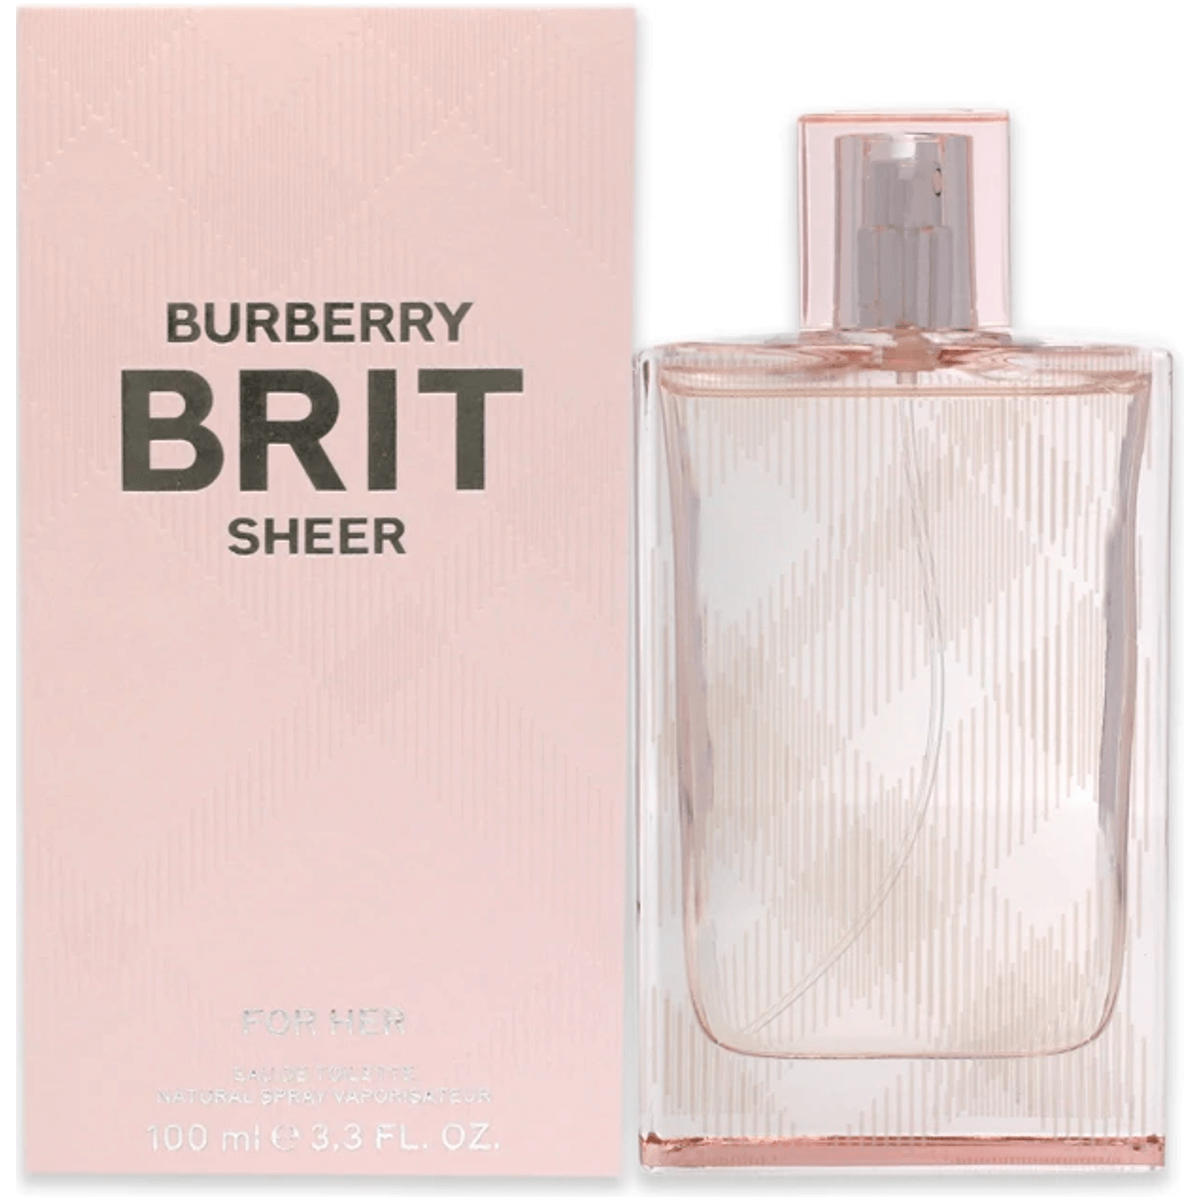 BURBERRY BRIT SHEER by Burberry for her EDT 3.3 / 3.4 oz New in Box